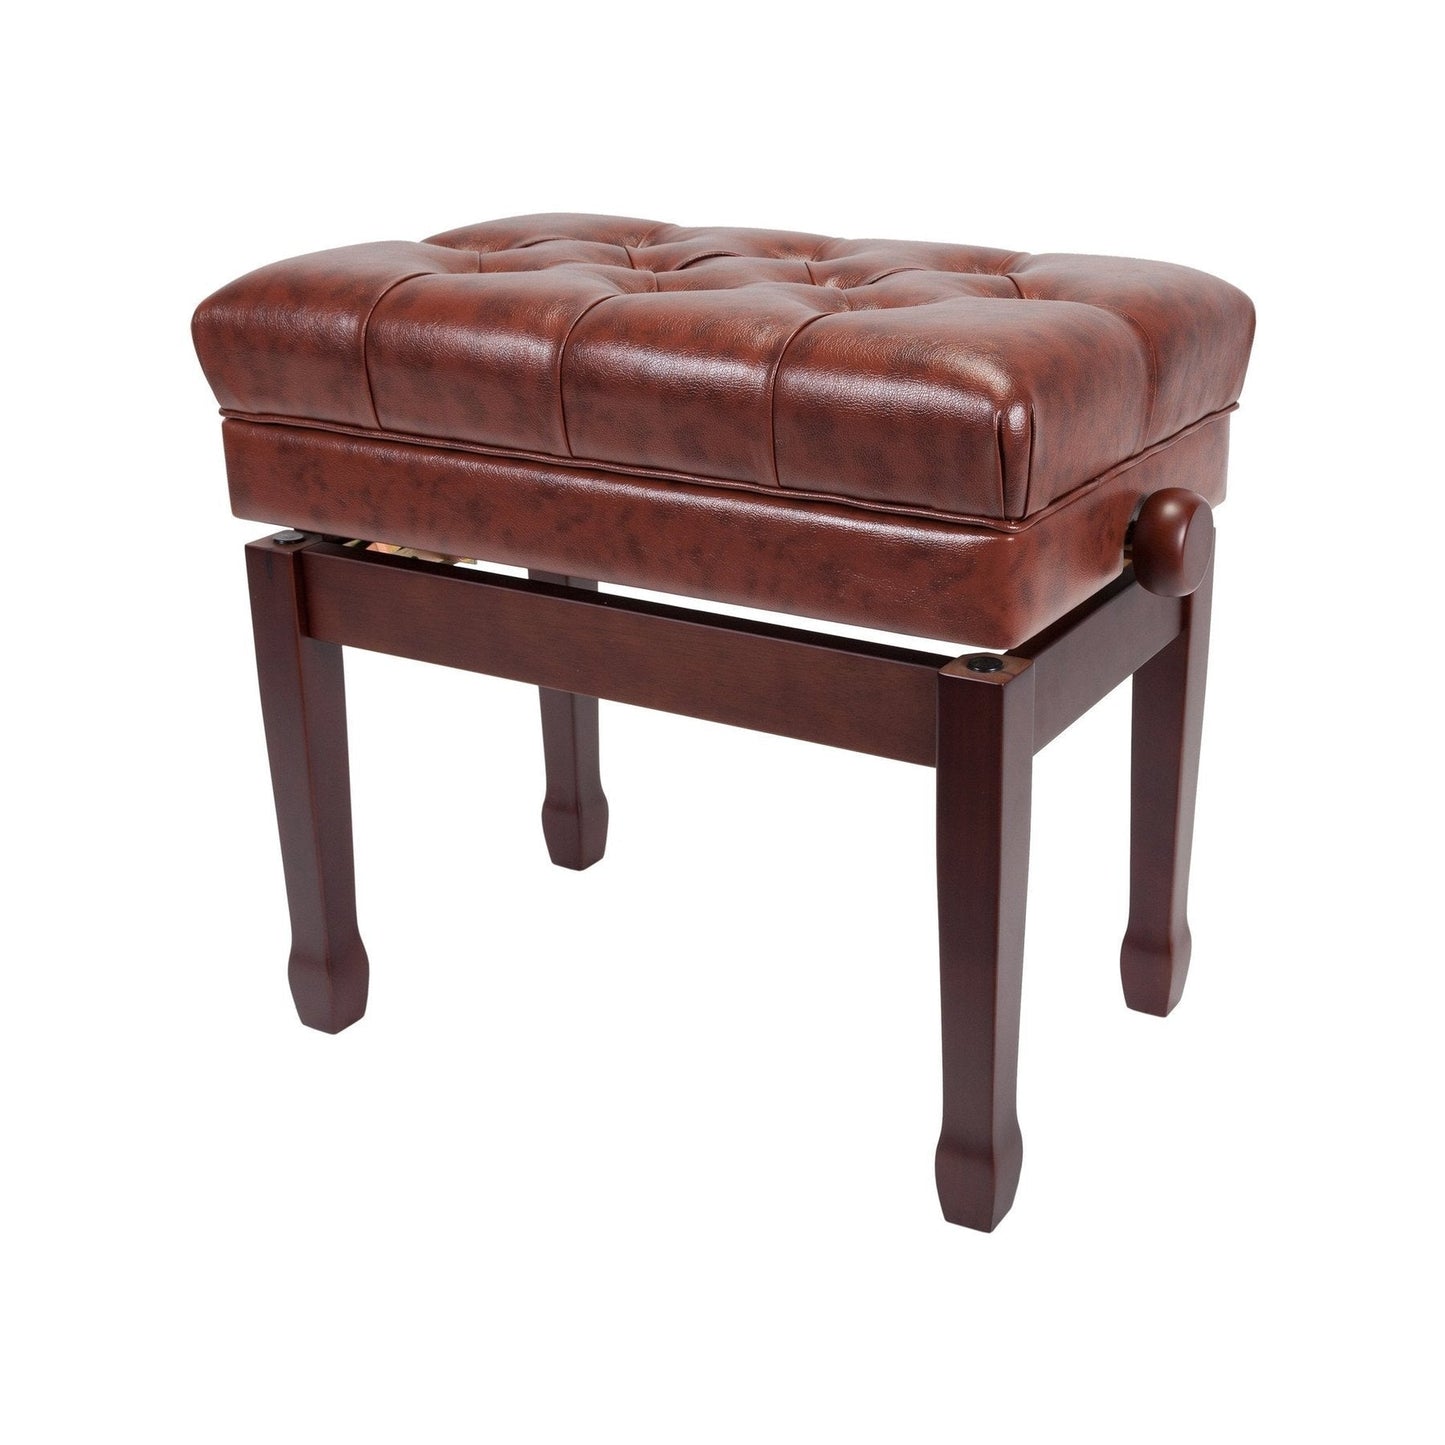 Crown Premium Tufted Double Padded Height Adjustable Piano Stool with Storage Compartment (Walnut)